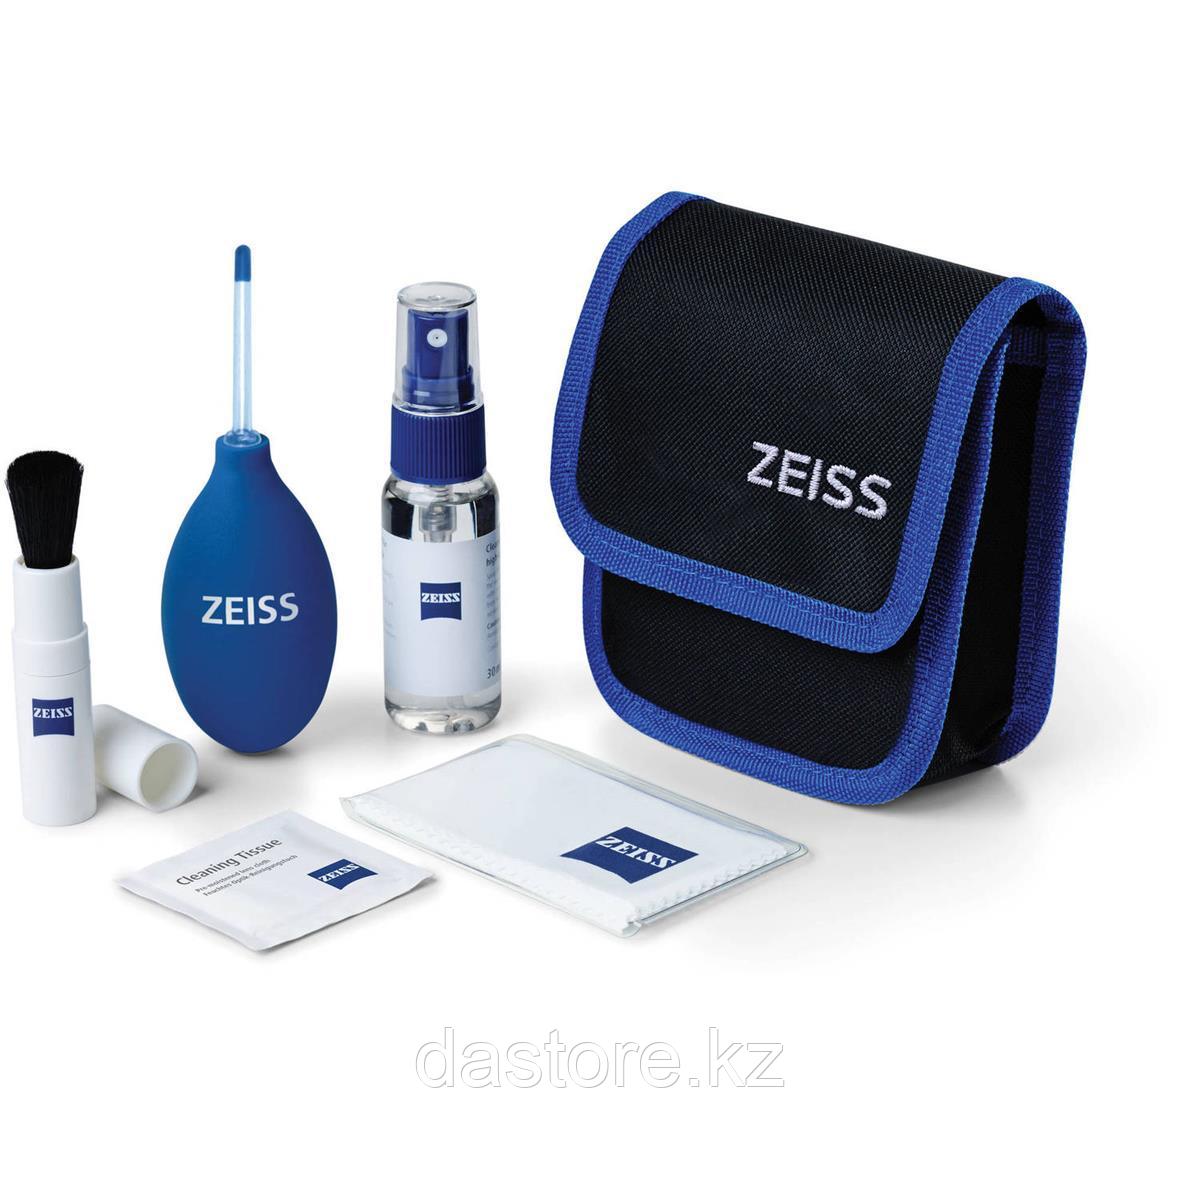 Carl Zeiss Cleaning KIT - фото 1 - id-p68575674